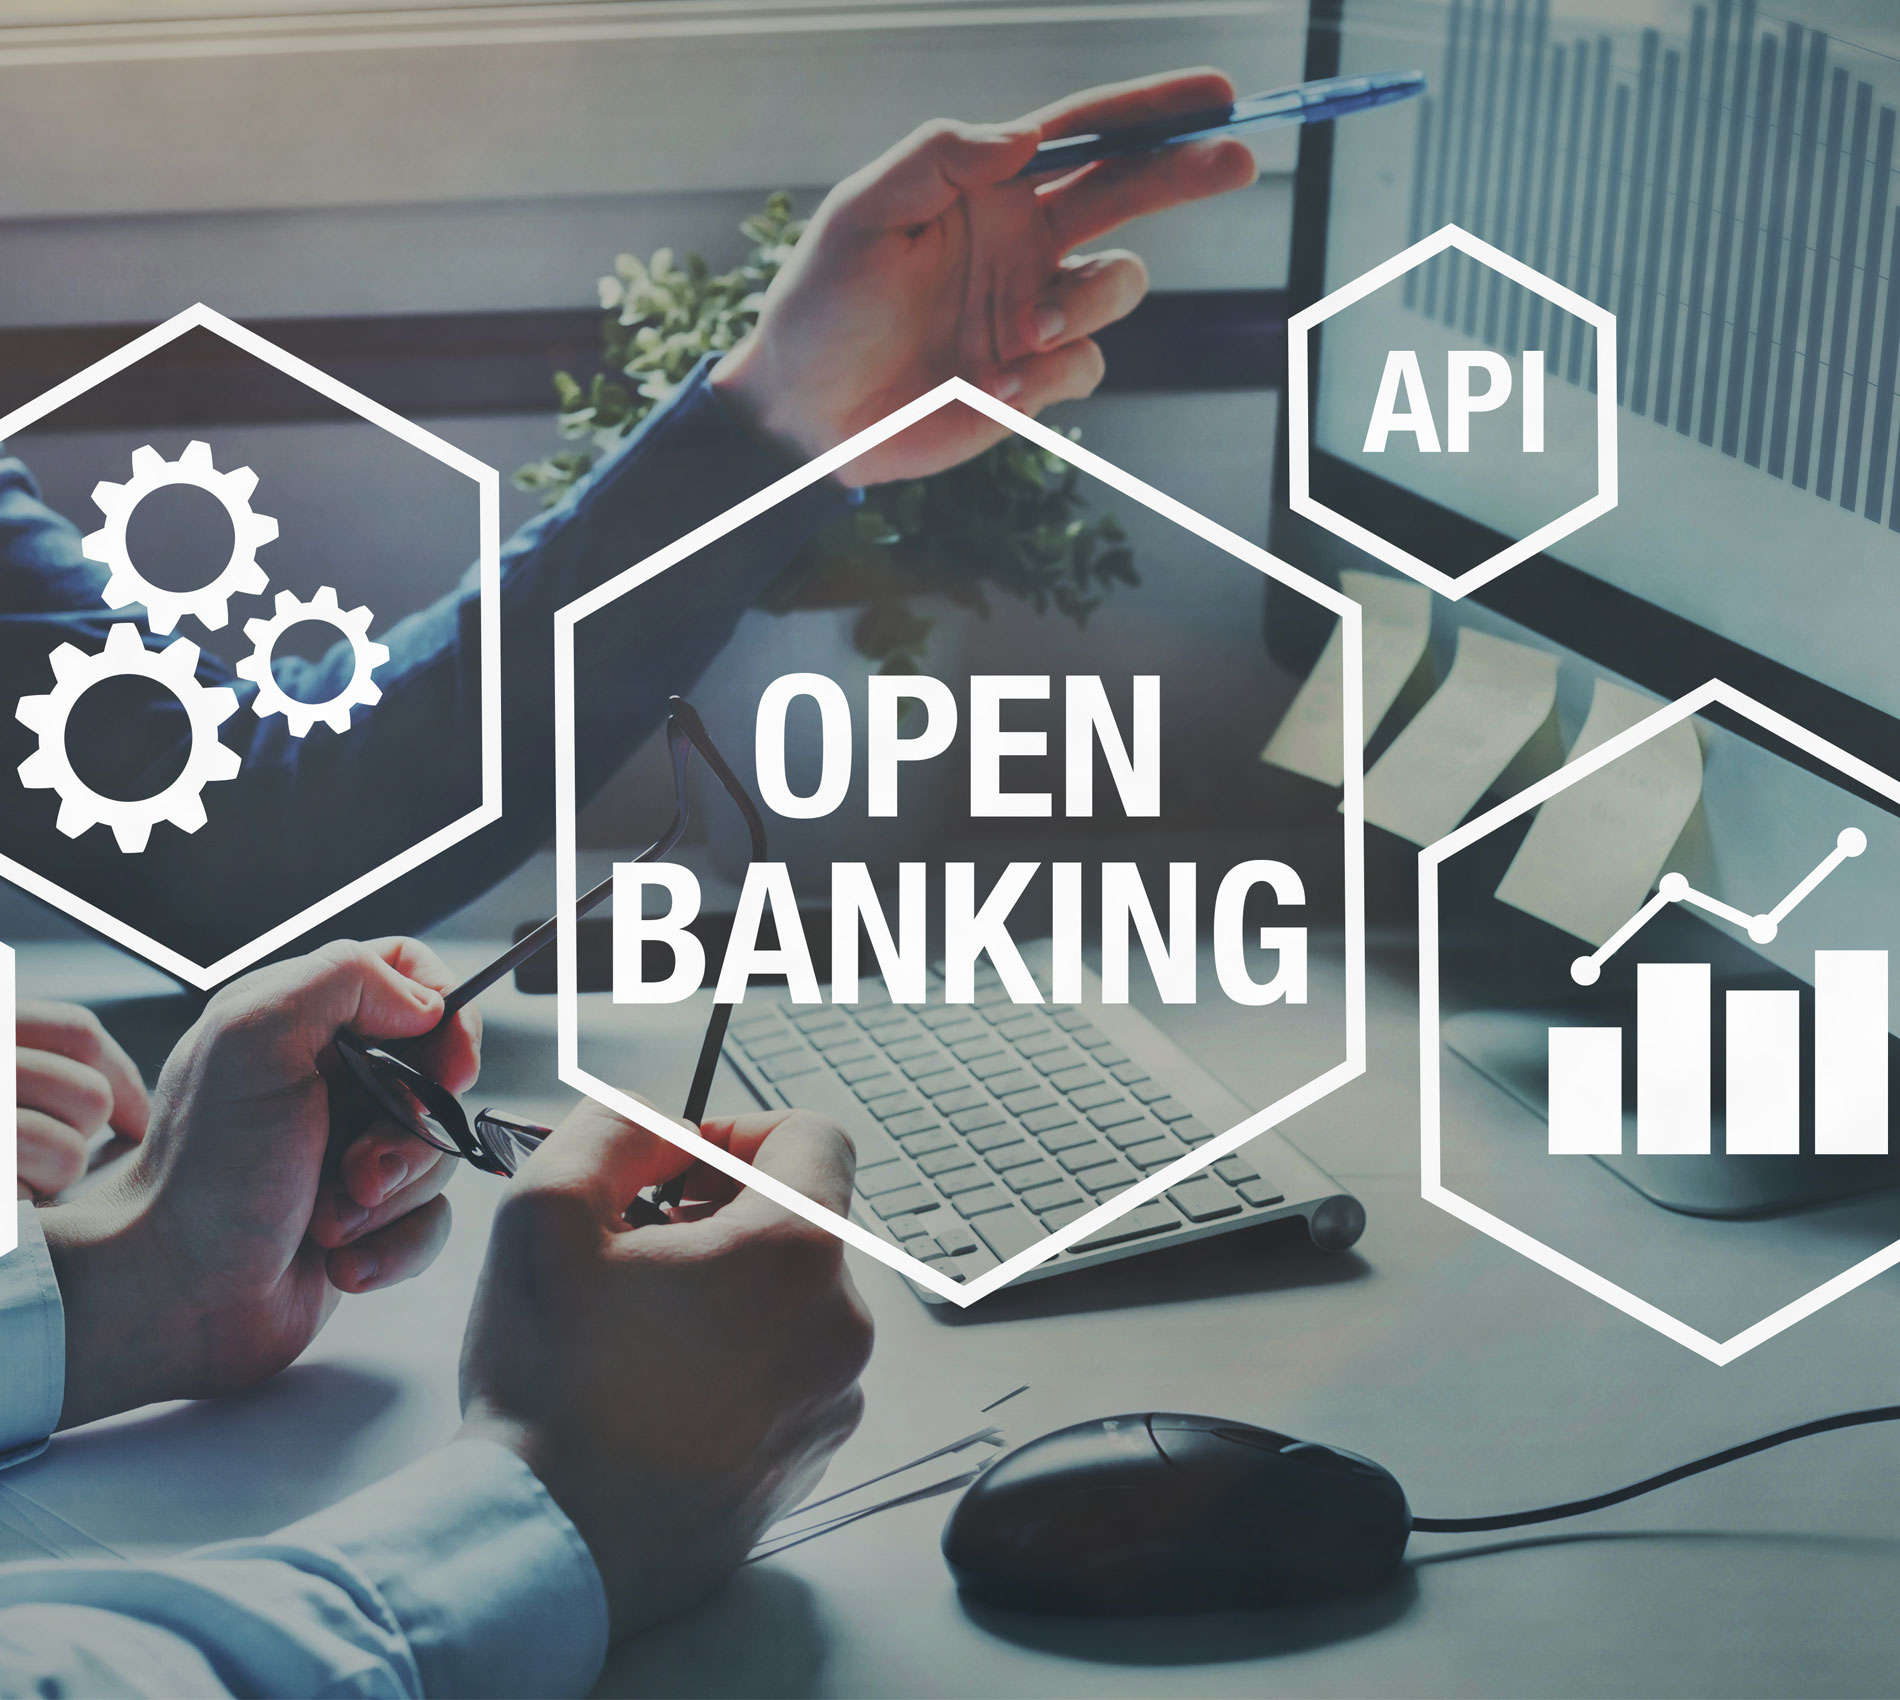 Third phase of Open Banking in Brazil will be integrated with Pix